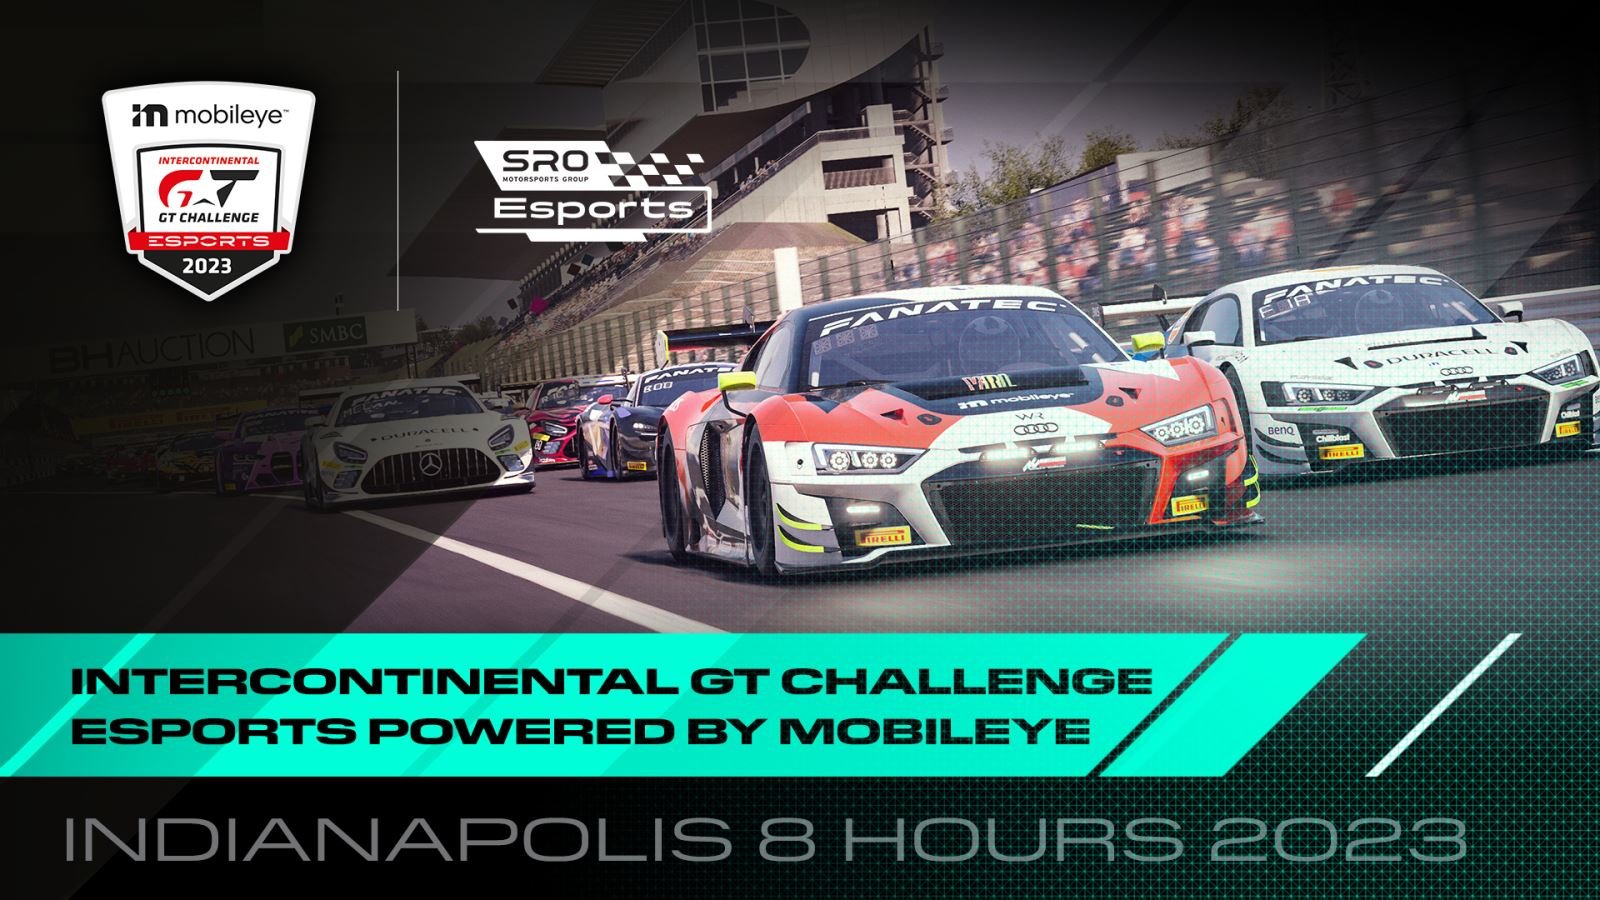 Final fight to settle the Intercontinental GT Challenge Esports Powered by Mobileye title at the Indianapolis 8 Hours